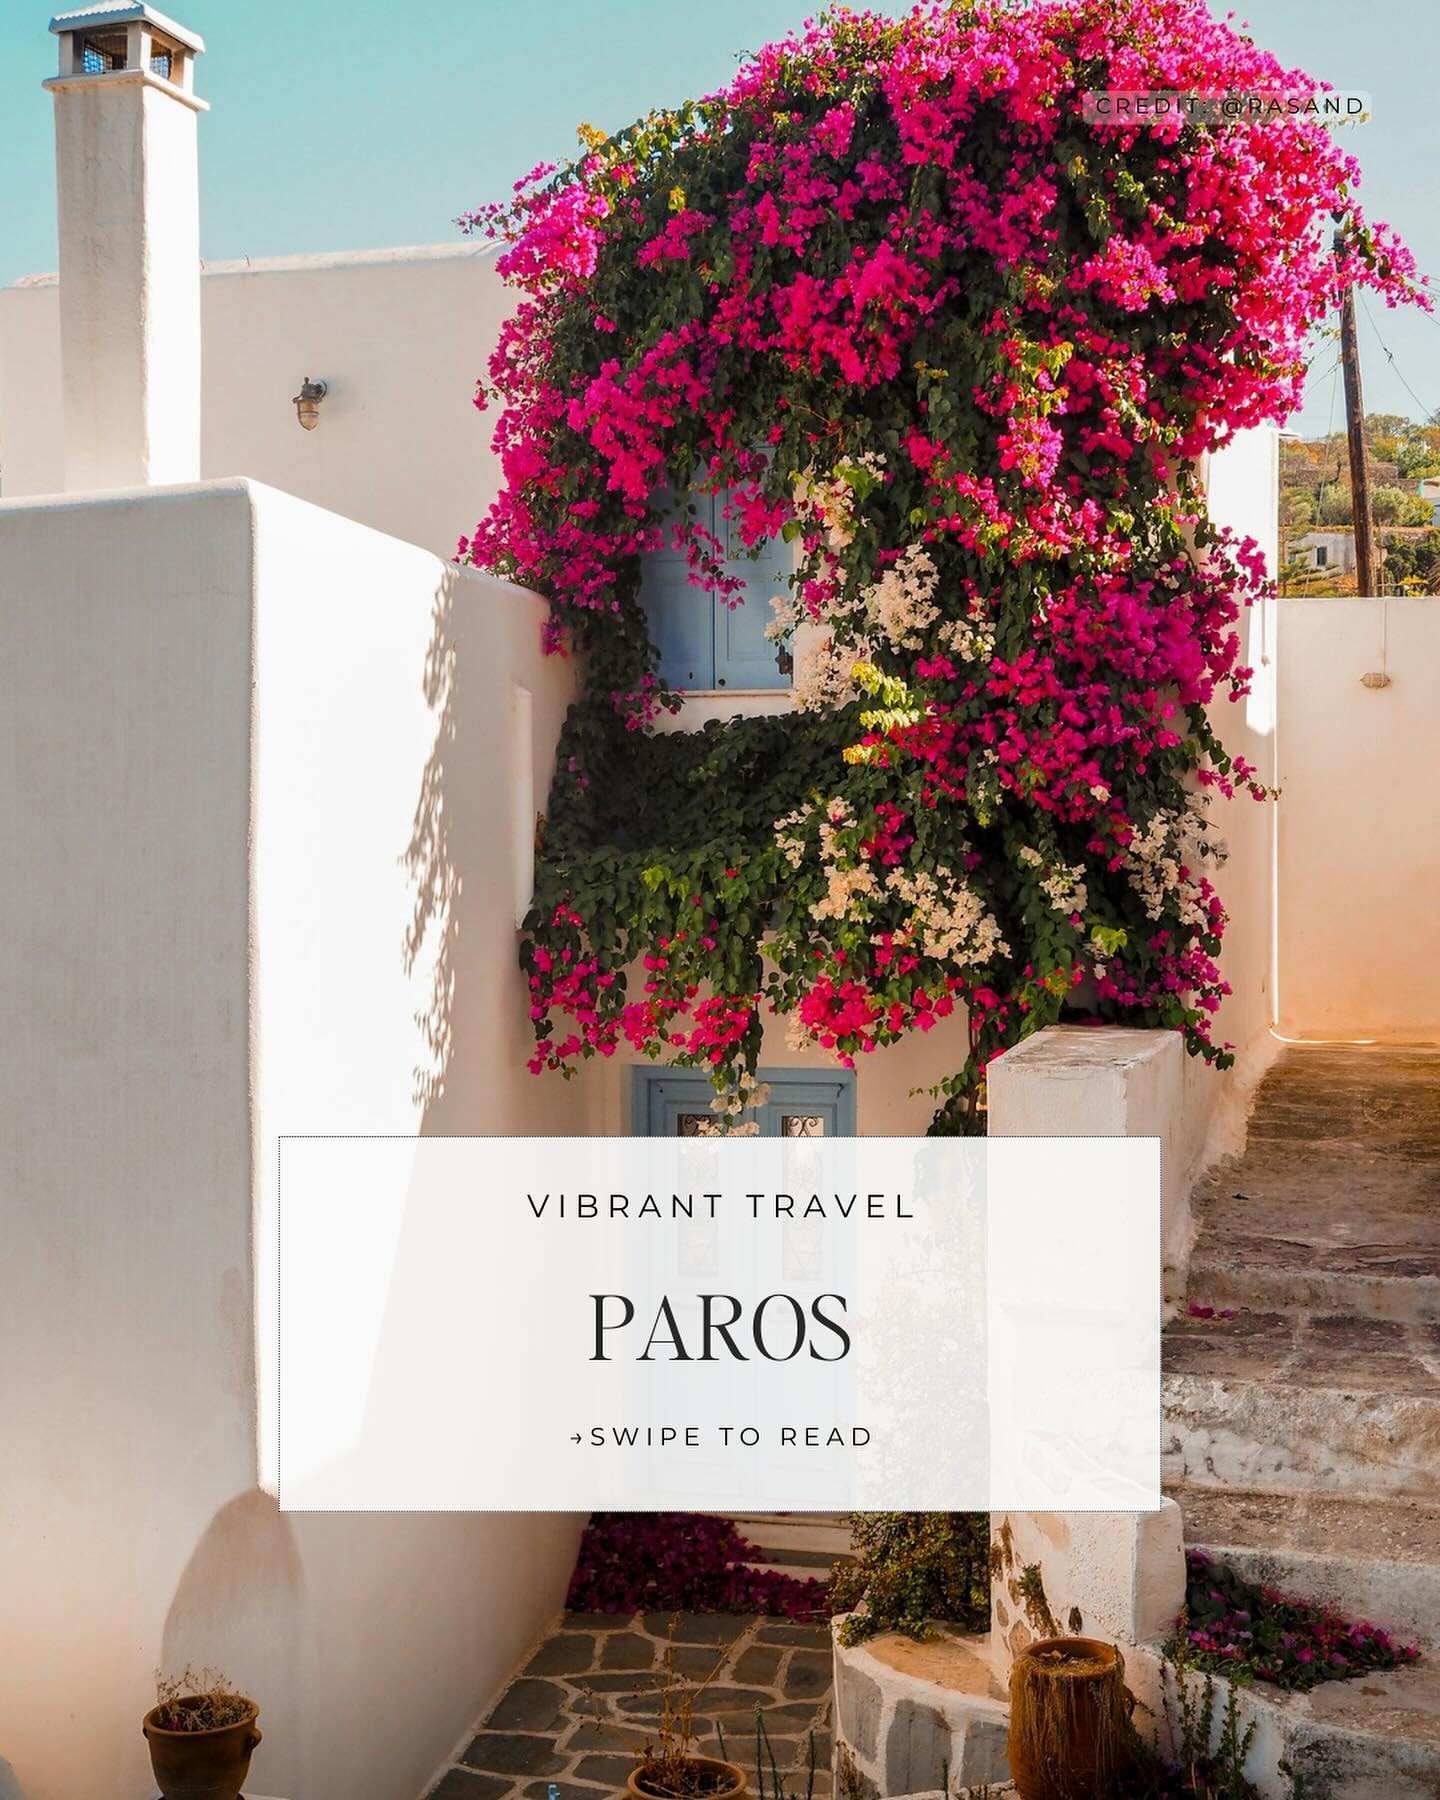 #EuropeanSummer is around the corner and so we&rsquo;re kicking things off with an Insider&rsquo;s Travel Guide to Paros ✨

Paros Island is authentic yet sexy and bustling with great nightlife, beach clubs, shopping and even better food. Just what yo